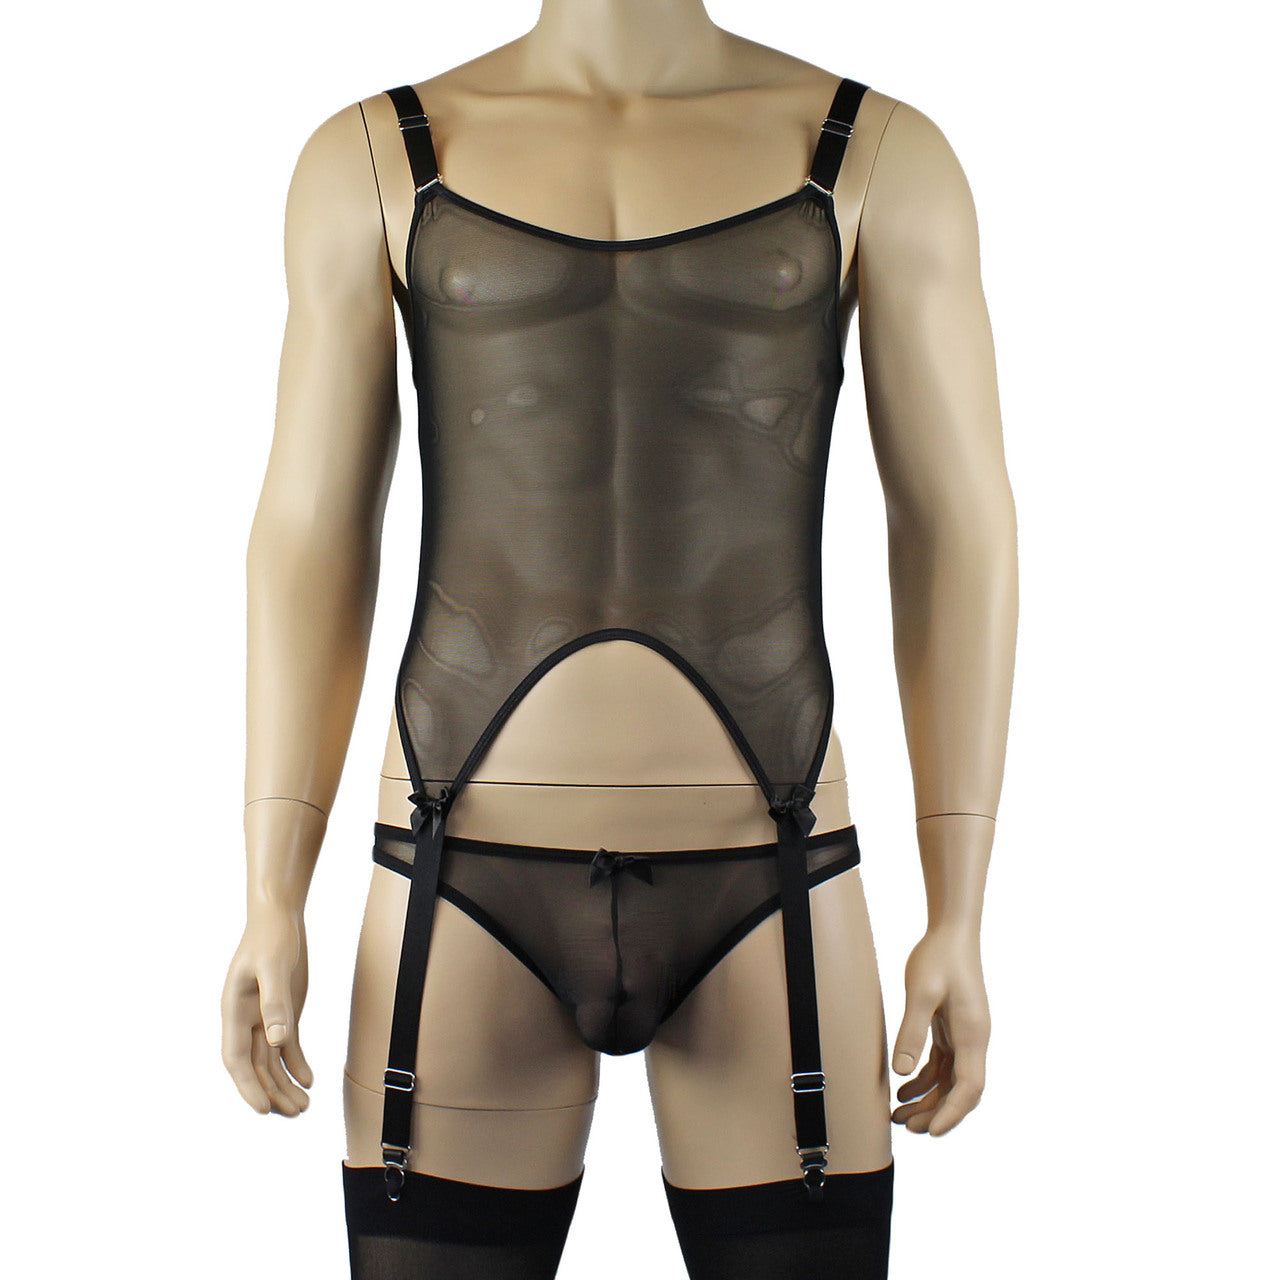 Mens Exotic Corset Top, Brief & Stockings - Sizes up to 3XL Black